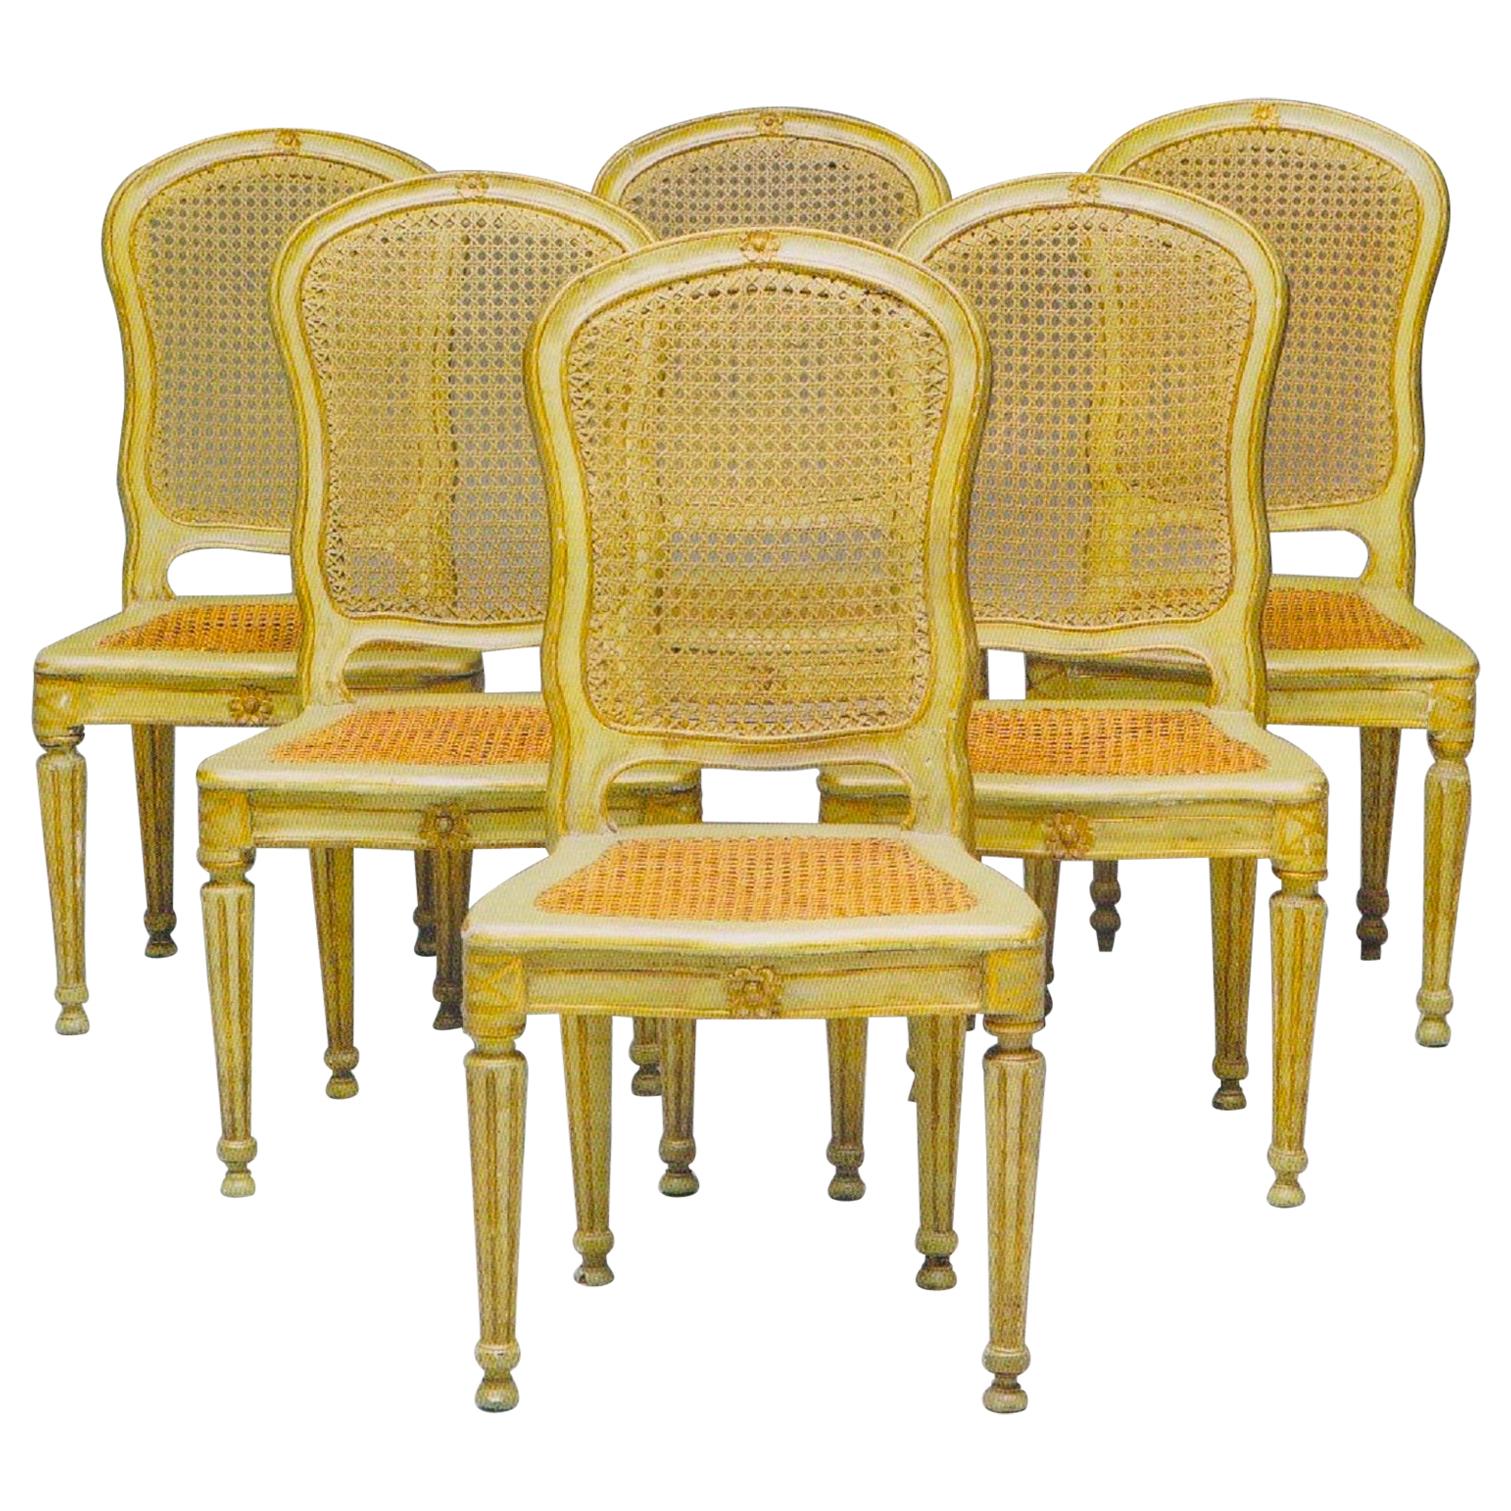 Fine Set of Six Italian, 18th Century Painted and Parcel-Gilt Chairs For Sale